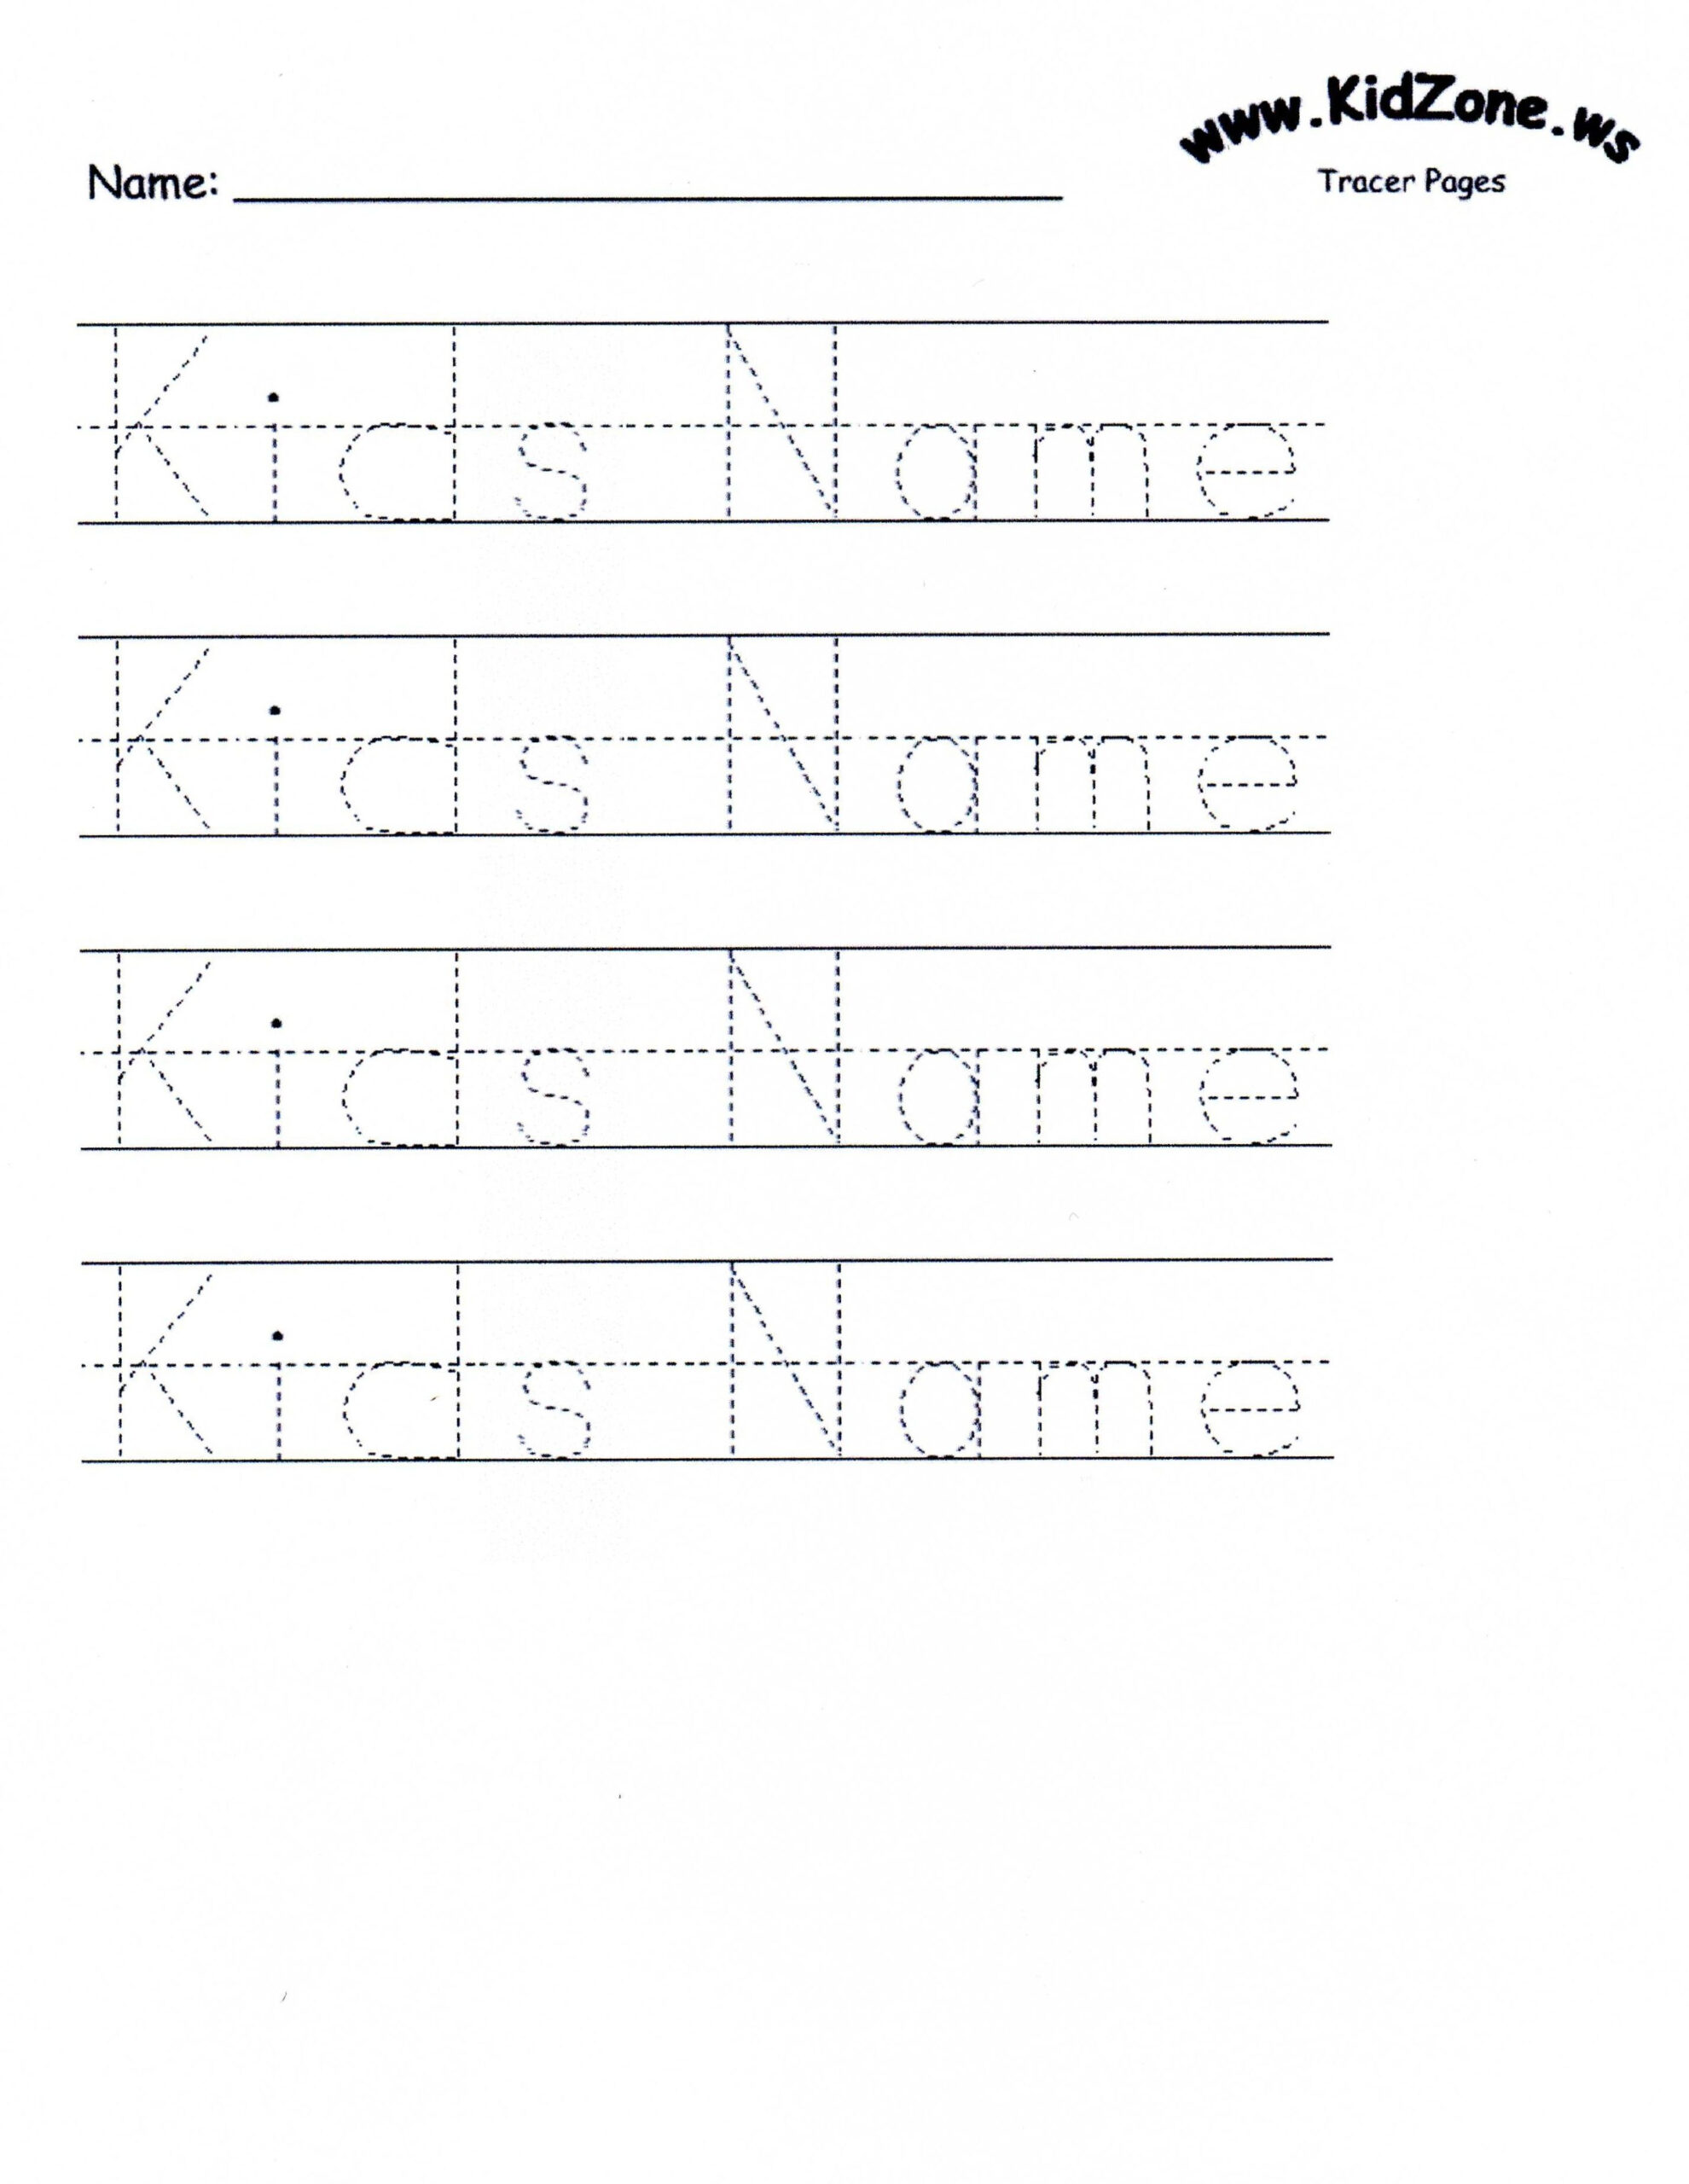 Customizable Printable Letter Pages | Name Tracing regarding Name Tracing Kindergarten